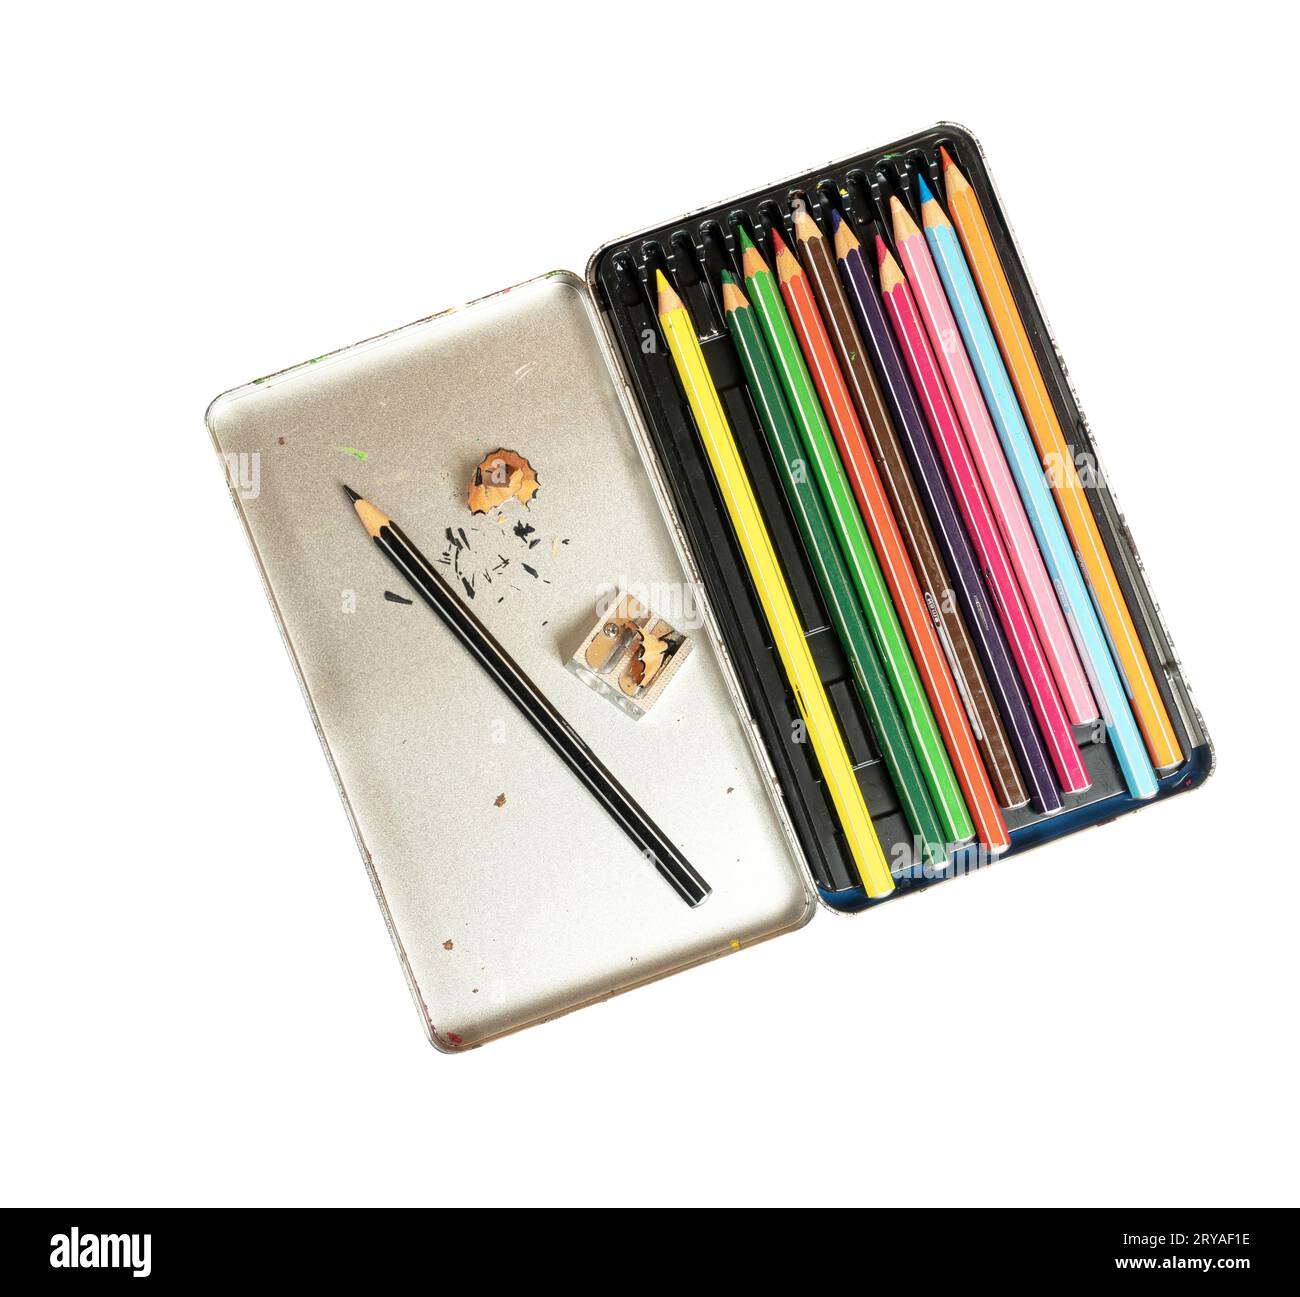 a metal box of colored pencils and a pencil sharpener Stock Photo